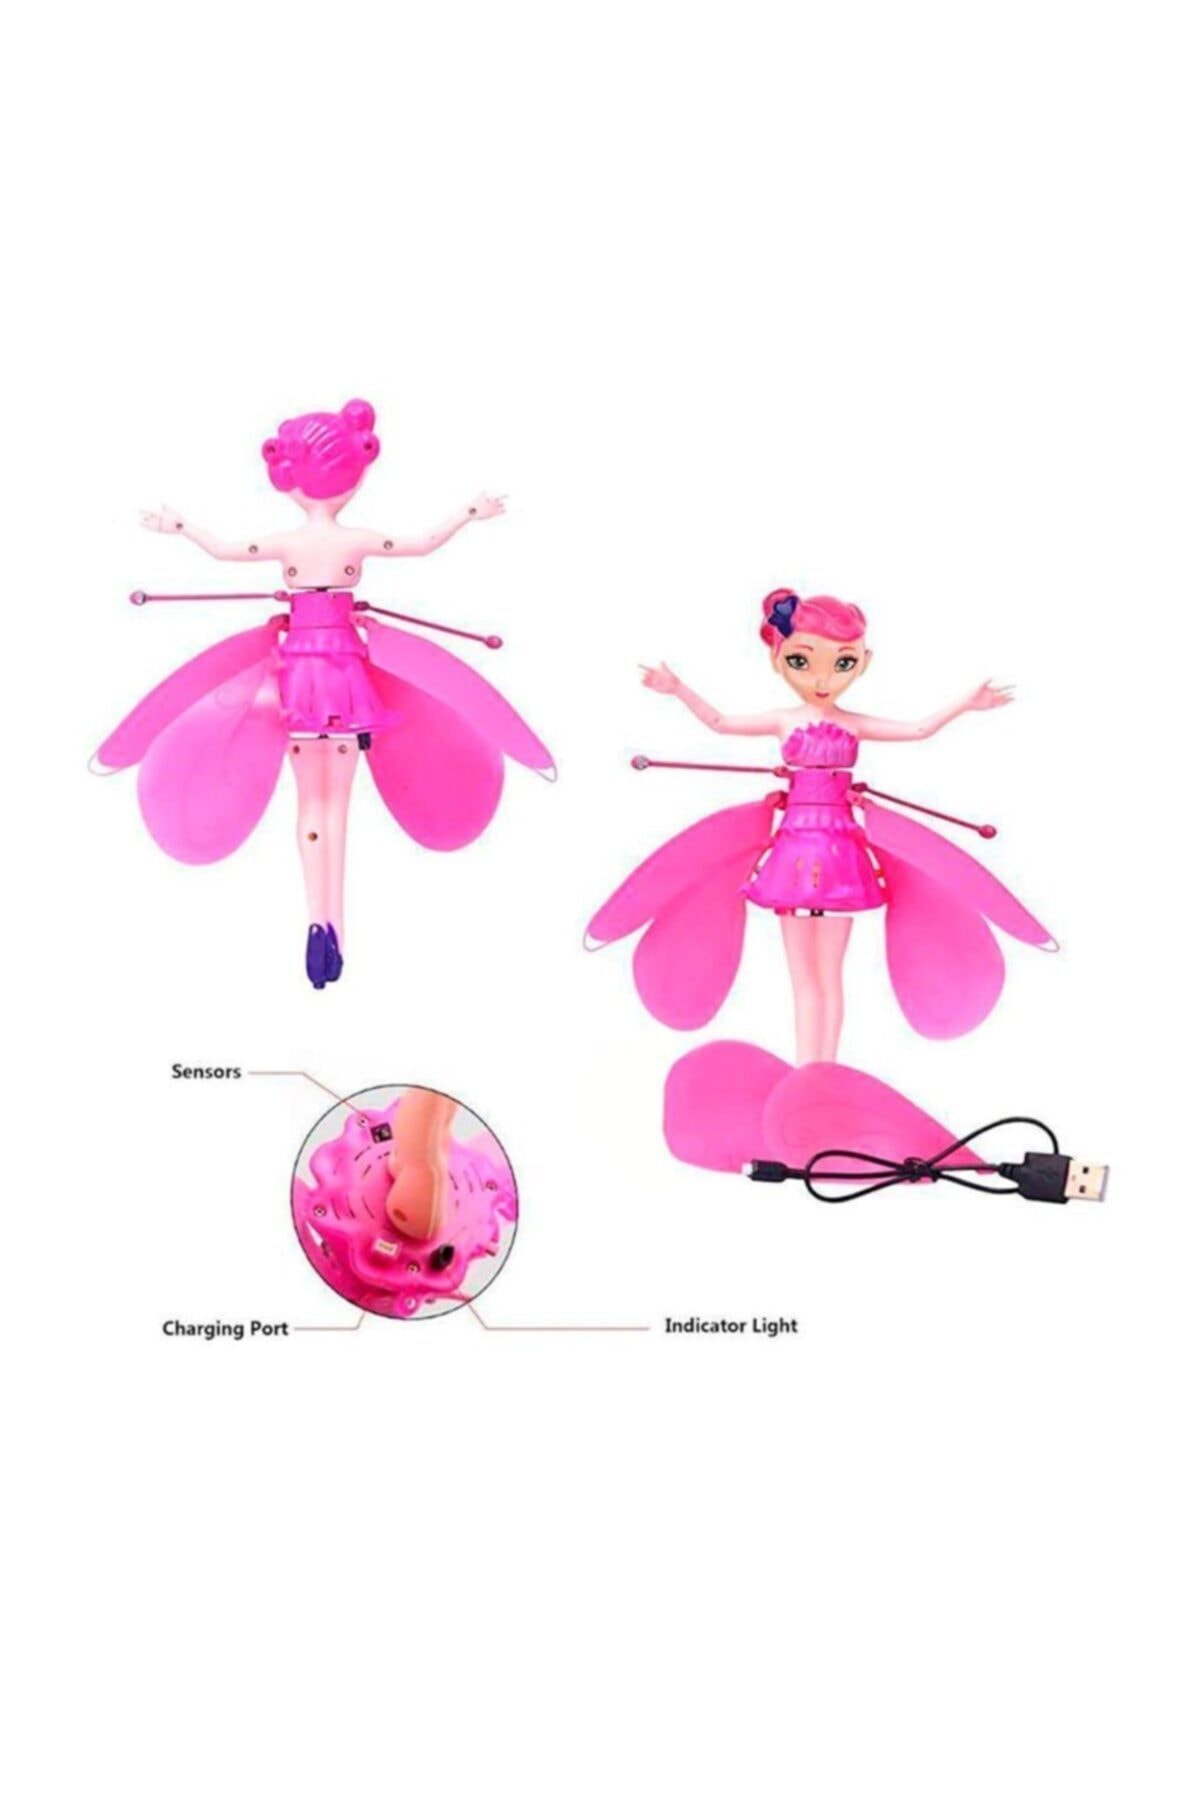 Flying-Fairy-Toy-Magic-Flying-Fairy-Pink-With-Charged-Motion-Sensor-For-Children-Kids-Girls-Fun-1.jpg